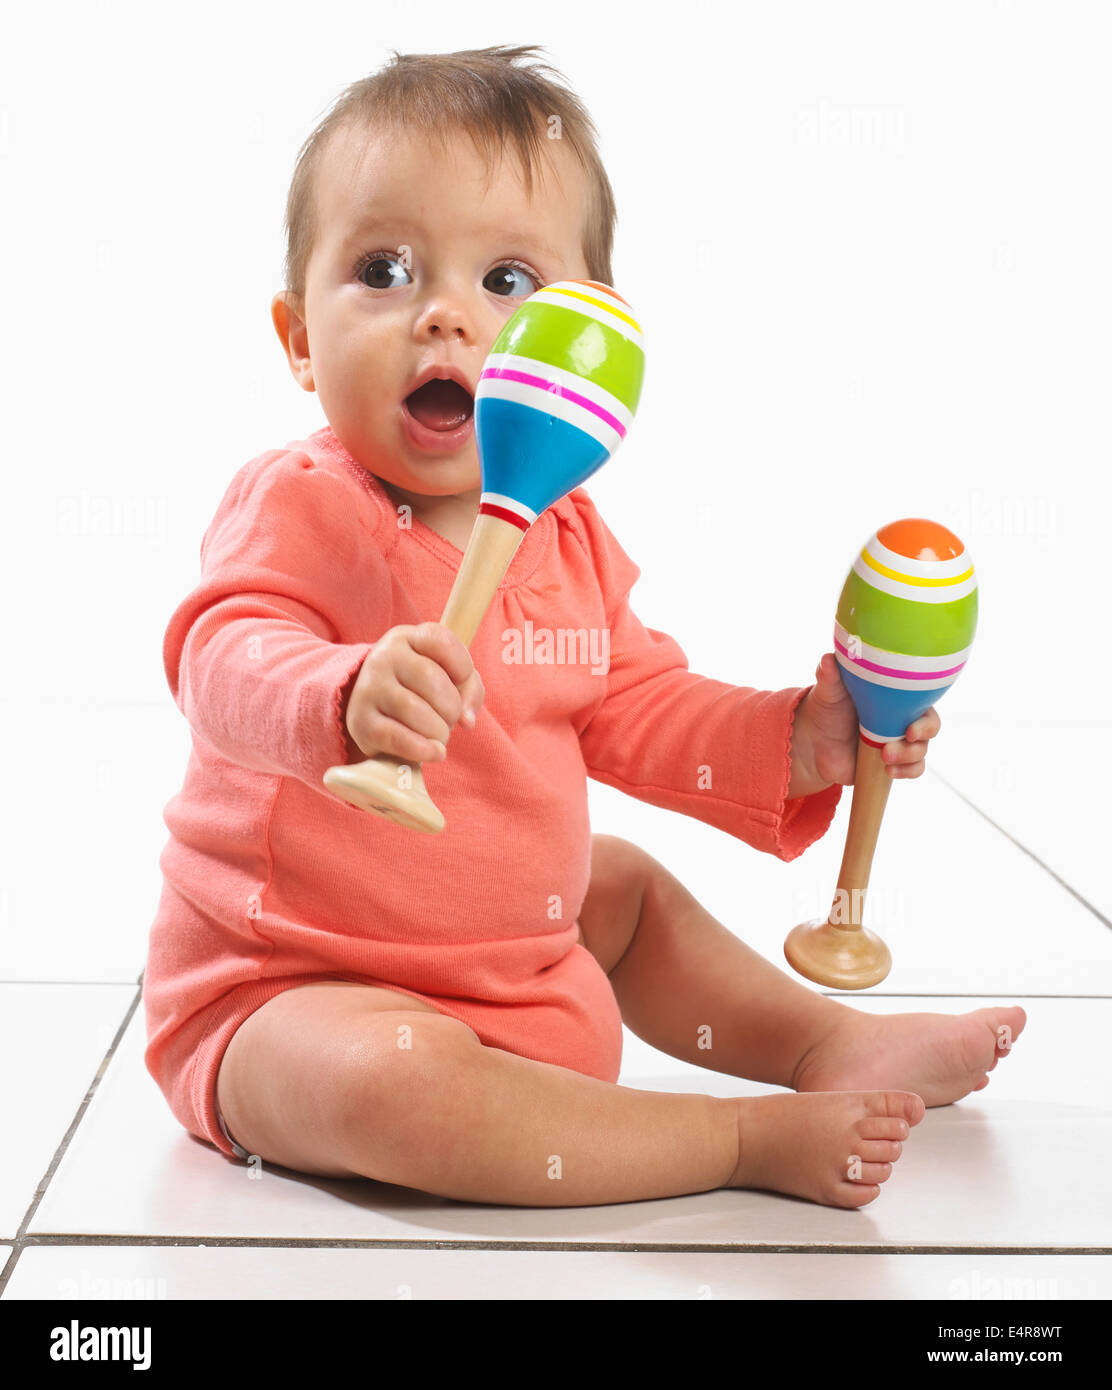 Baby girl (8 months) with maraca in each hand Stock Photo